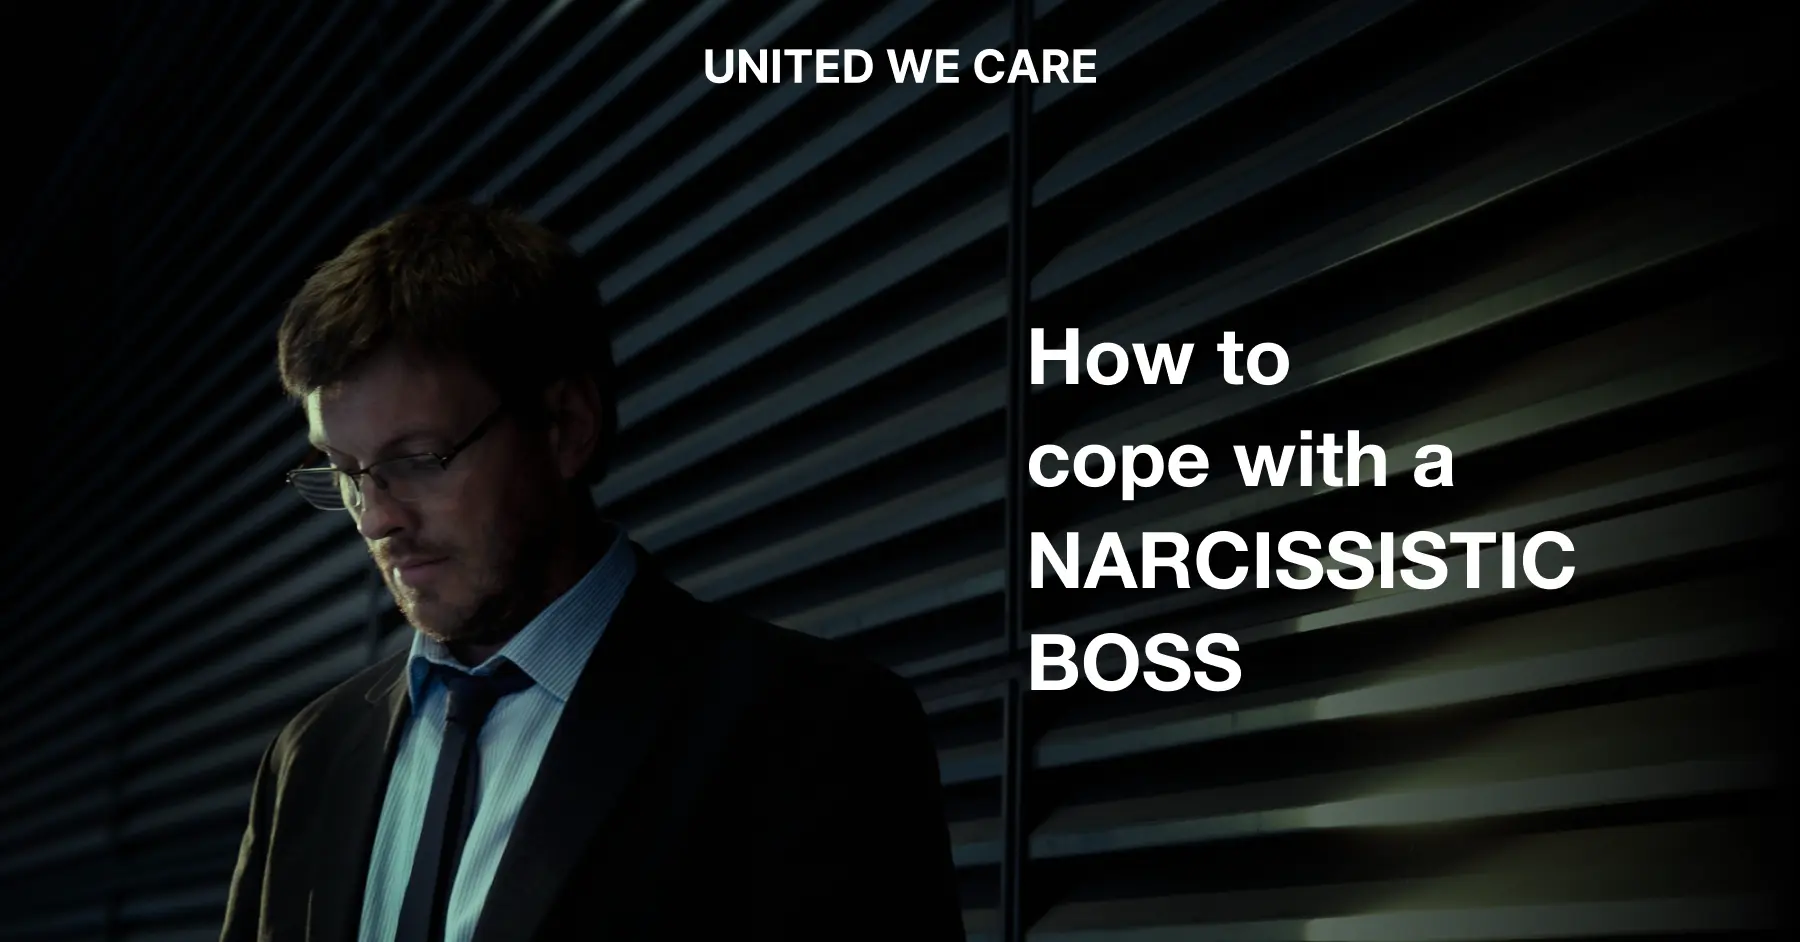 Narcissistic Boss: 5 Tips to Cope with a Narcissistic Boss